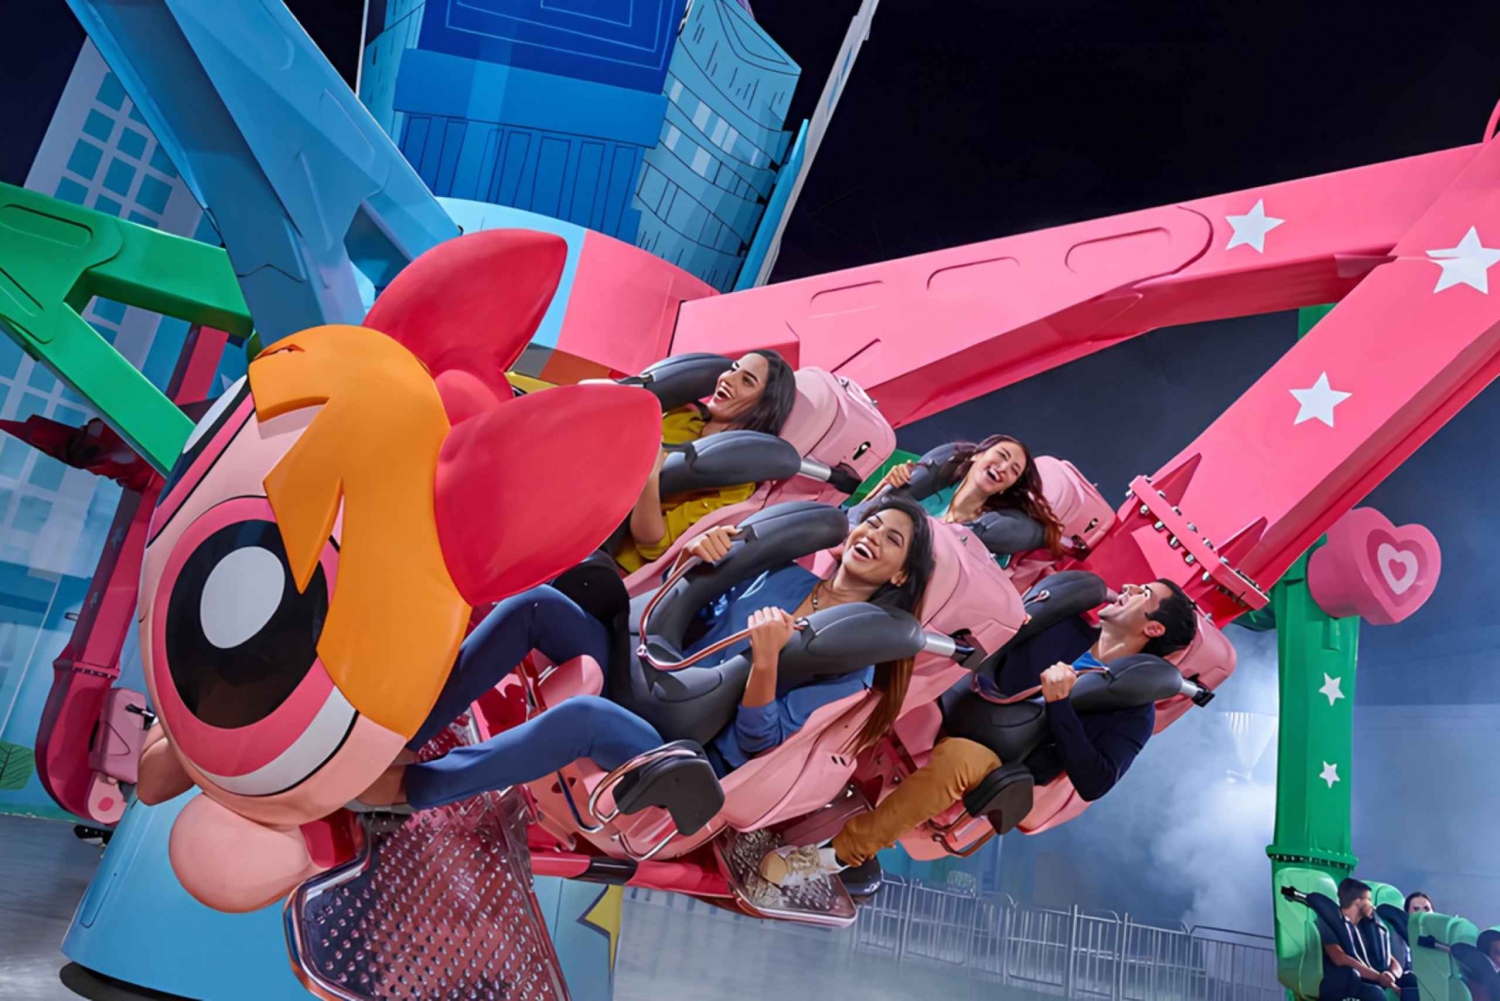 Dubai: IMG Worlds of Adventure Ticket with Hotel Transfers